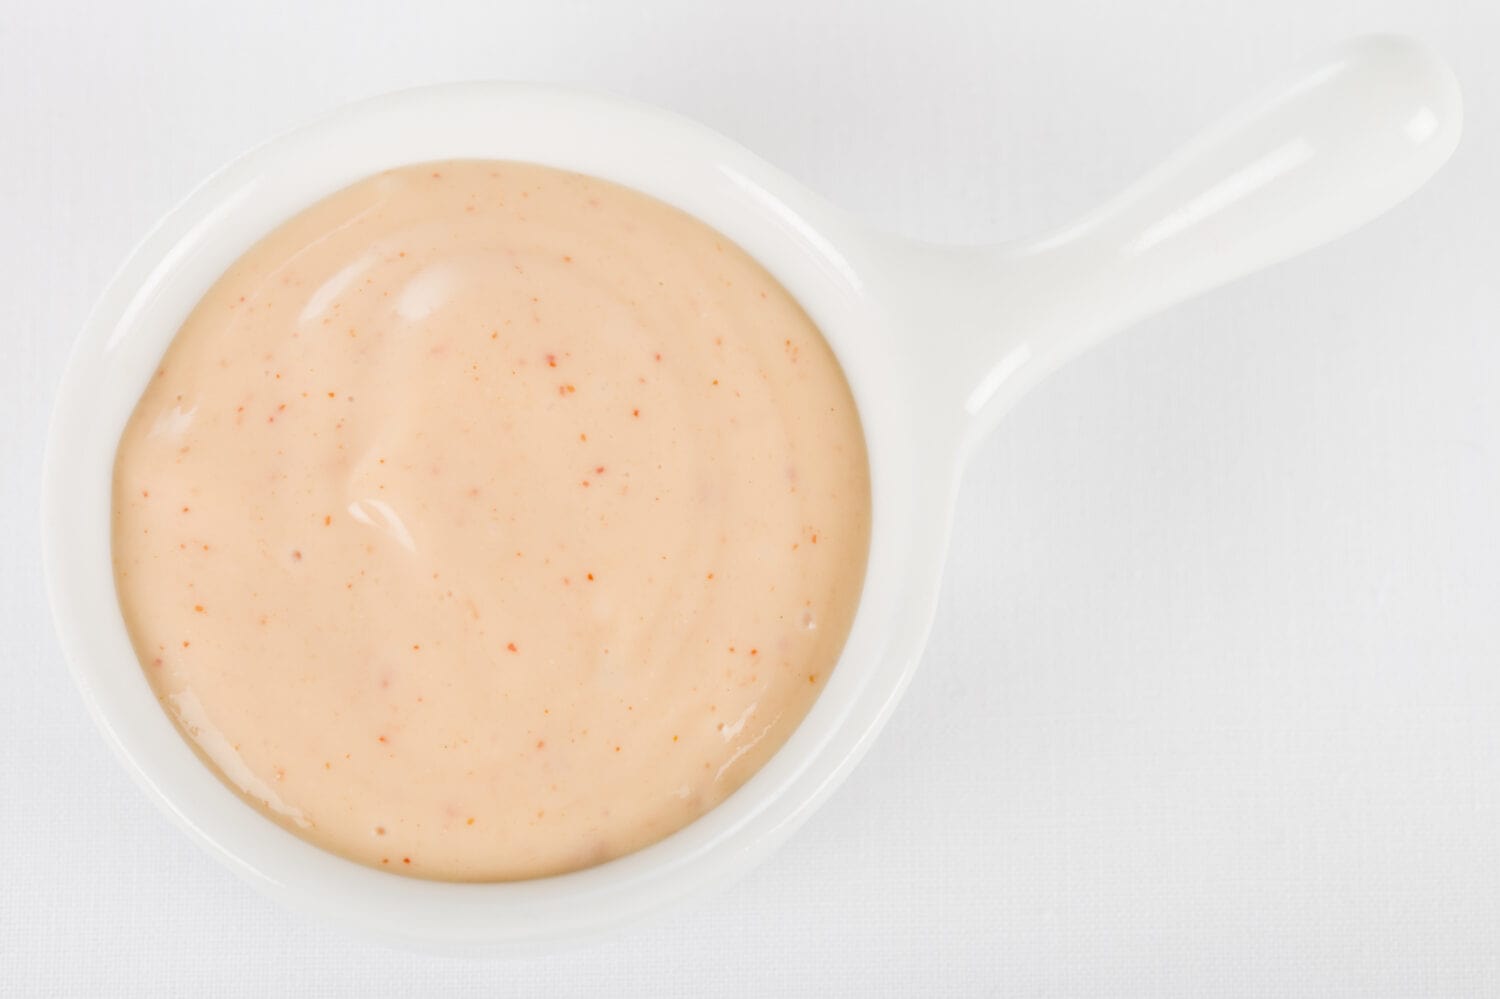 Rose Sauce / Fry Sauce Dip - Bowl of dipping sauce made with ketchup and mayonnaise. Shot from above on a white background.